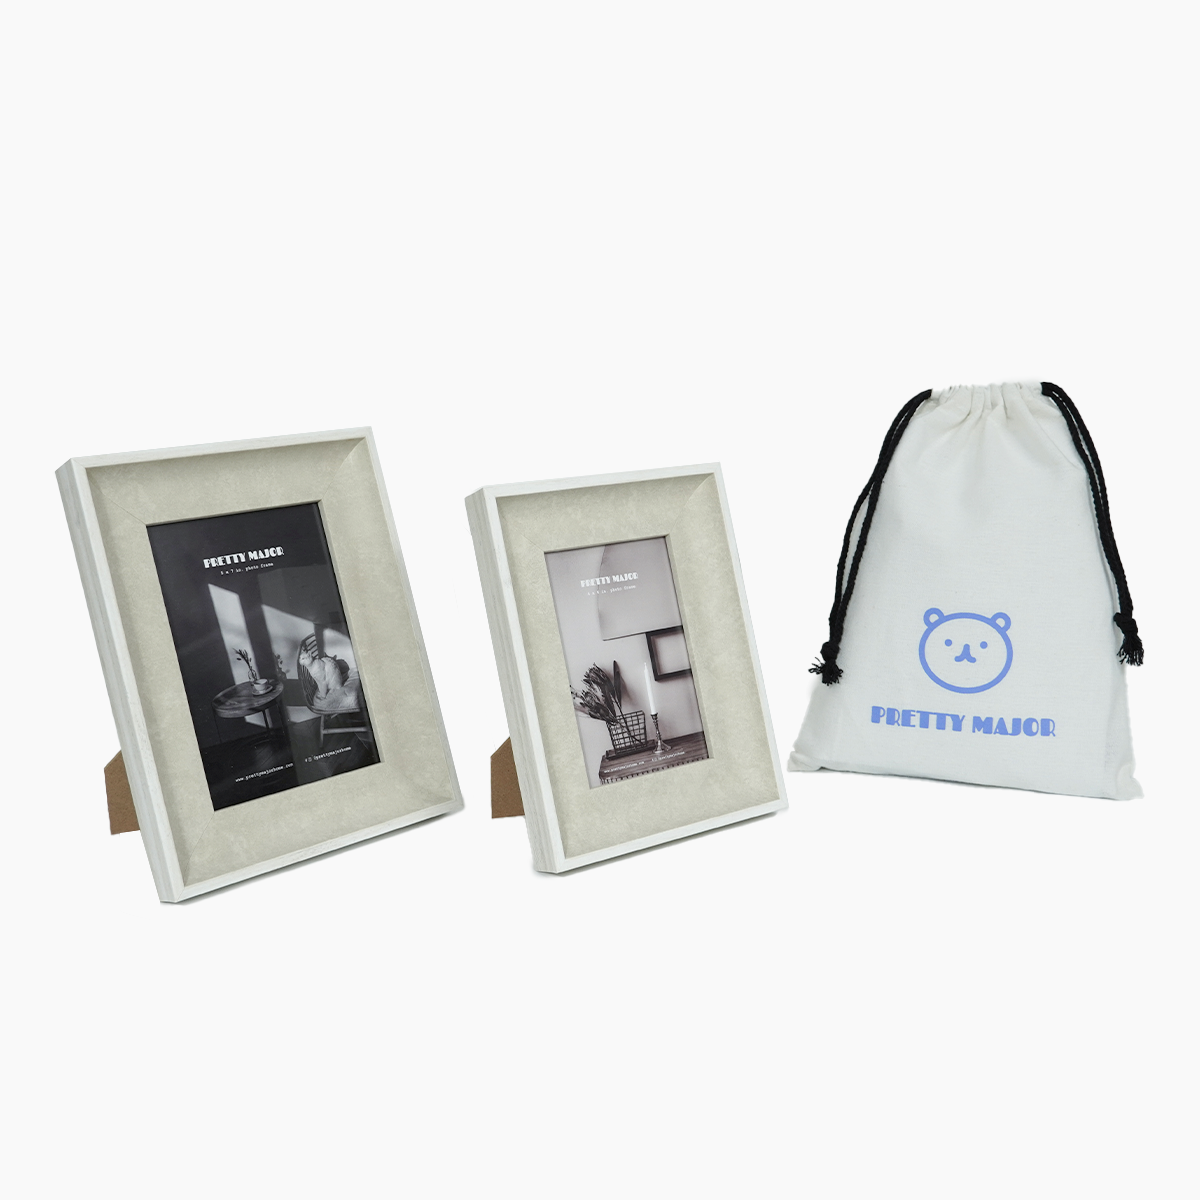 off white stone white thick border photo frames for 4r and 5r photos gift set with canvas bag